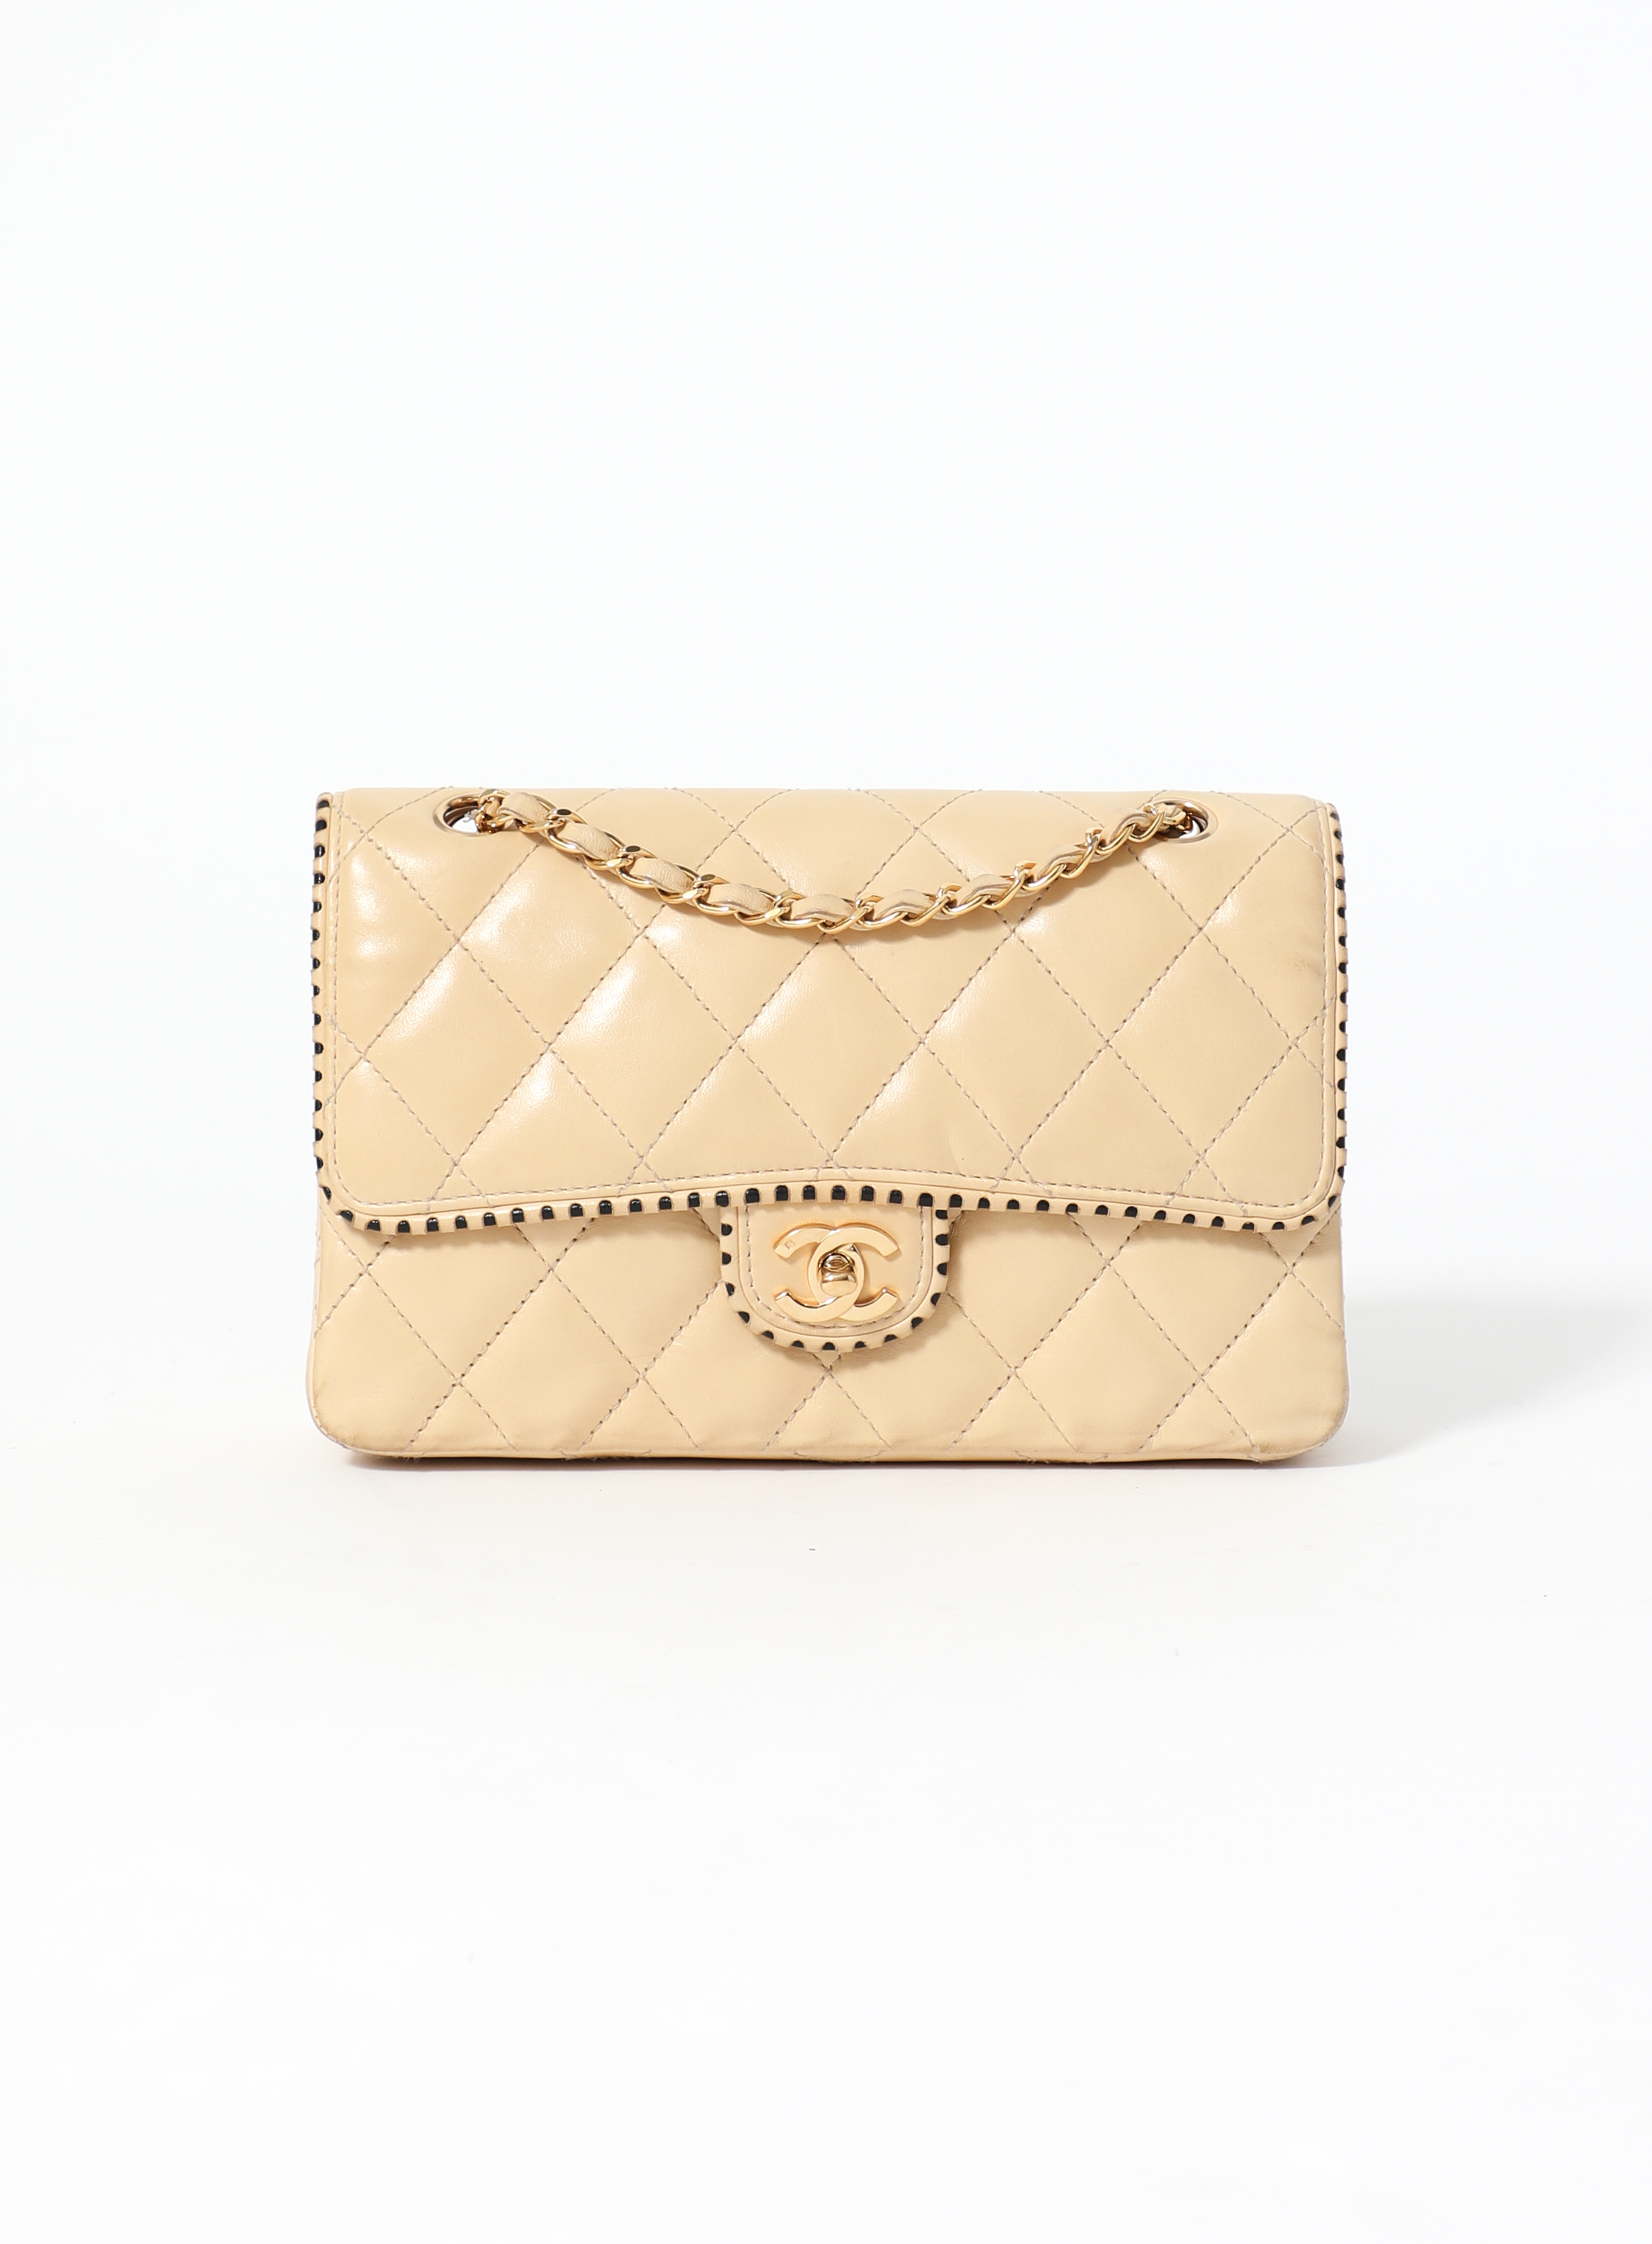 Get the best deals on CHANEL Yellow Wallets for Women when you shop the  largest online selection at . Free shipping on many items, Browse  your favorite brands